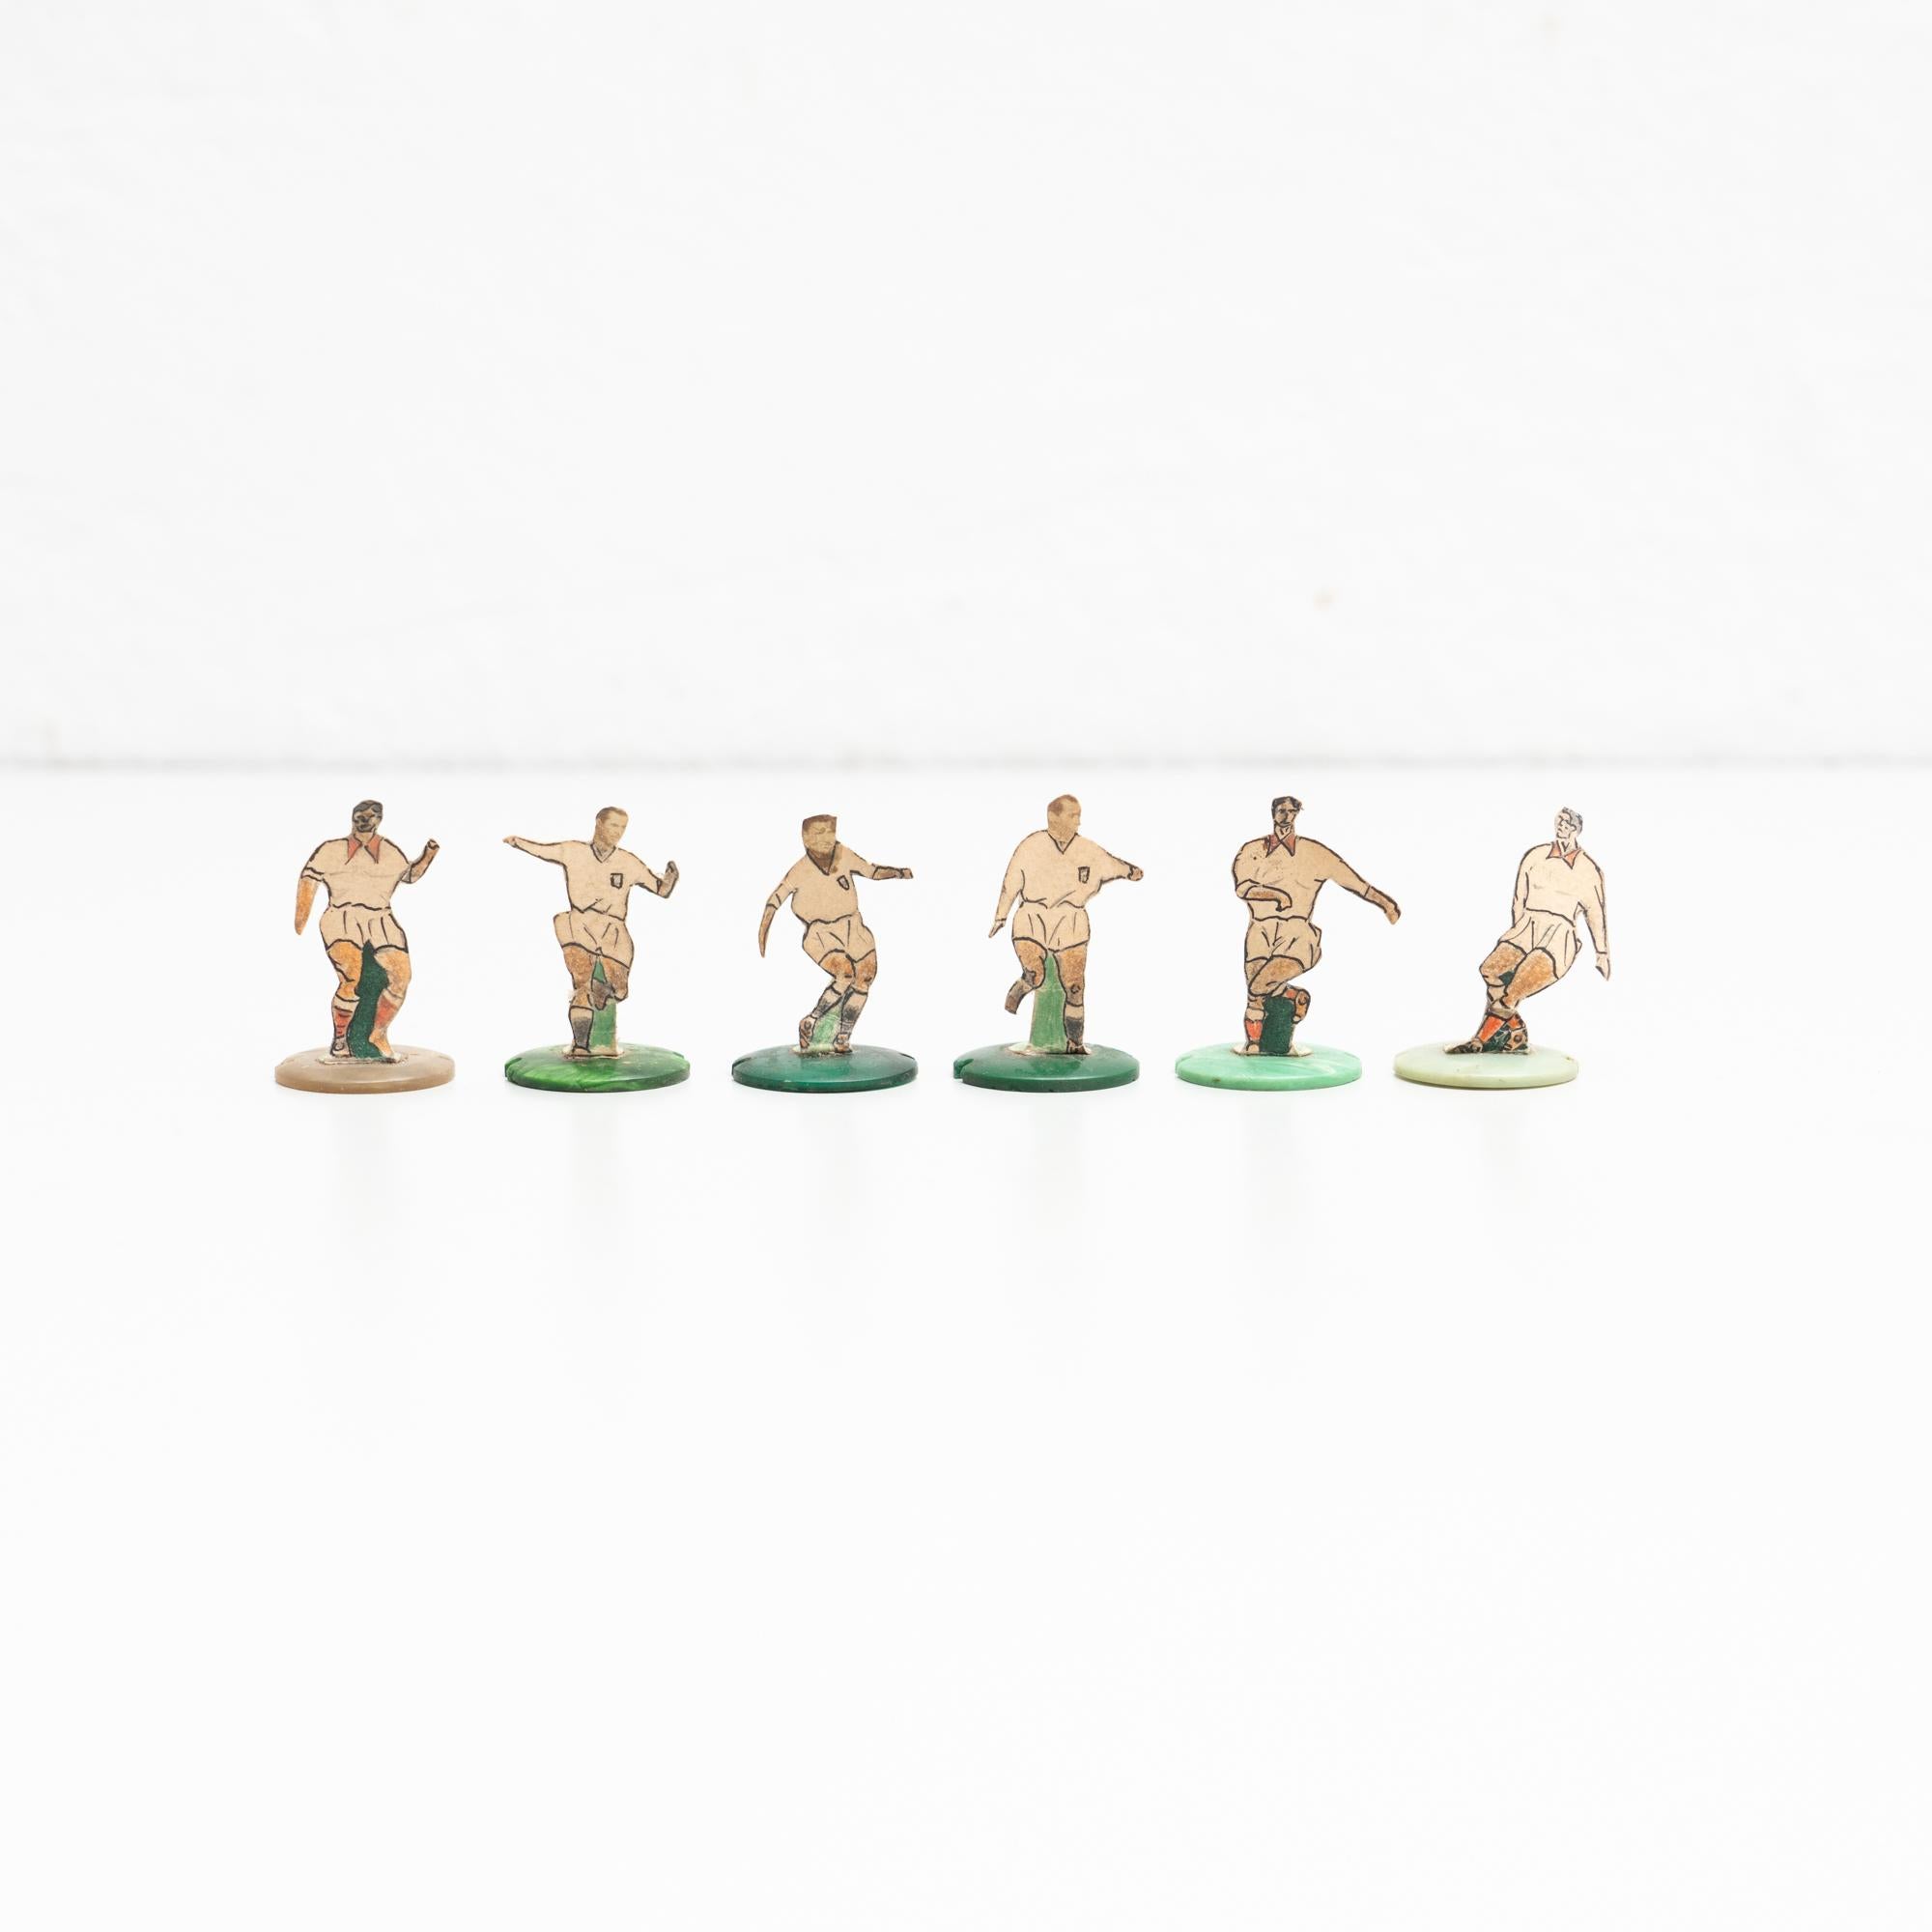 Set of six table button soccer game players. Traditional figures used to play this classic button Spanish game. 

The players are build buy attaching a printed photography or drawing of an actual football soccer player to a clothing button.